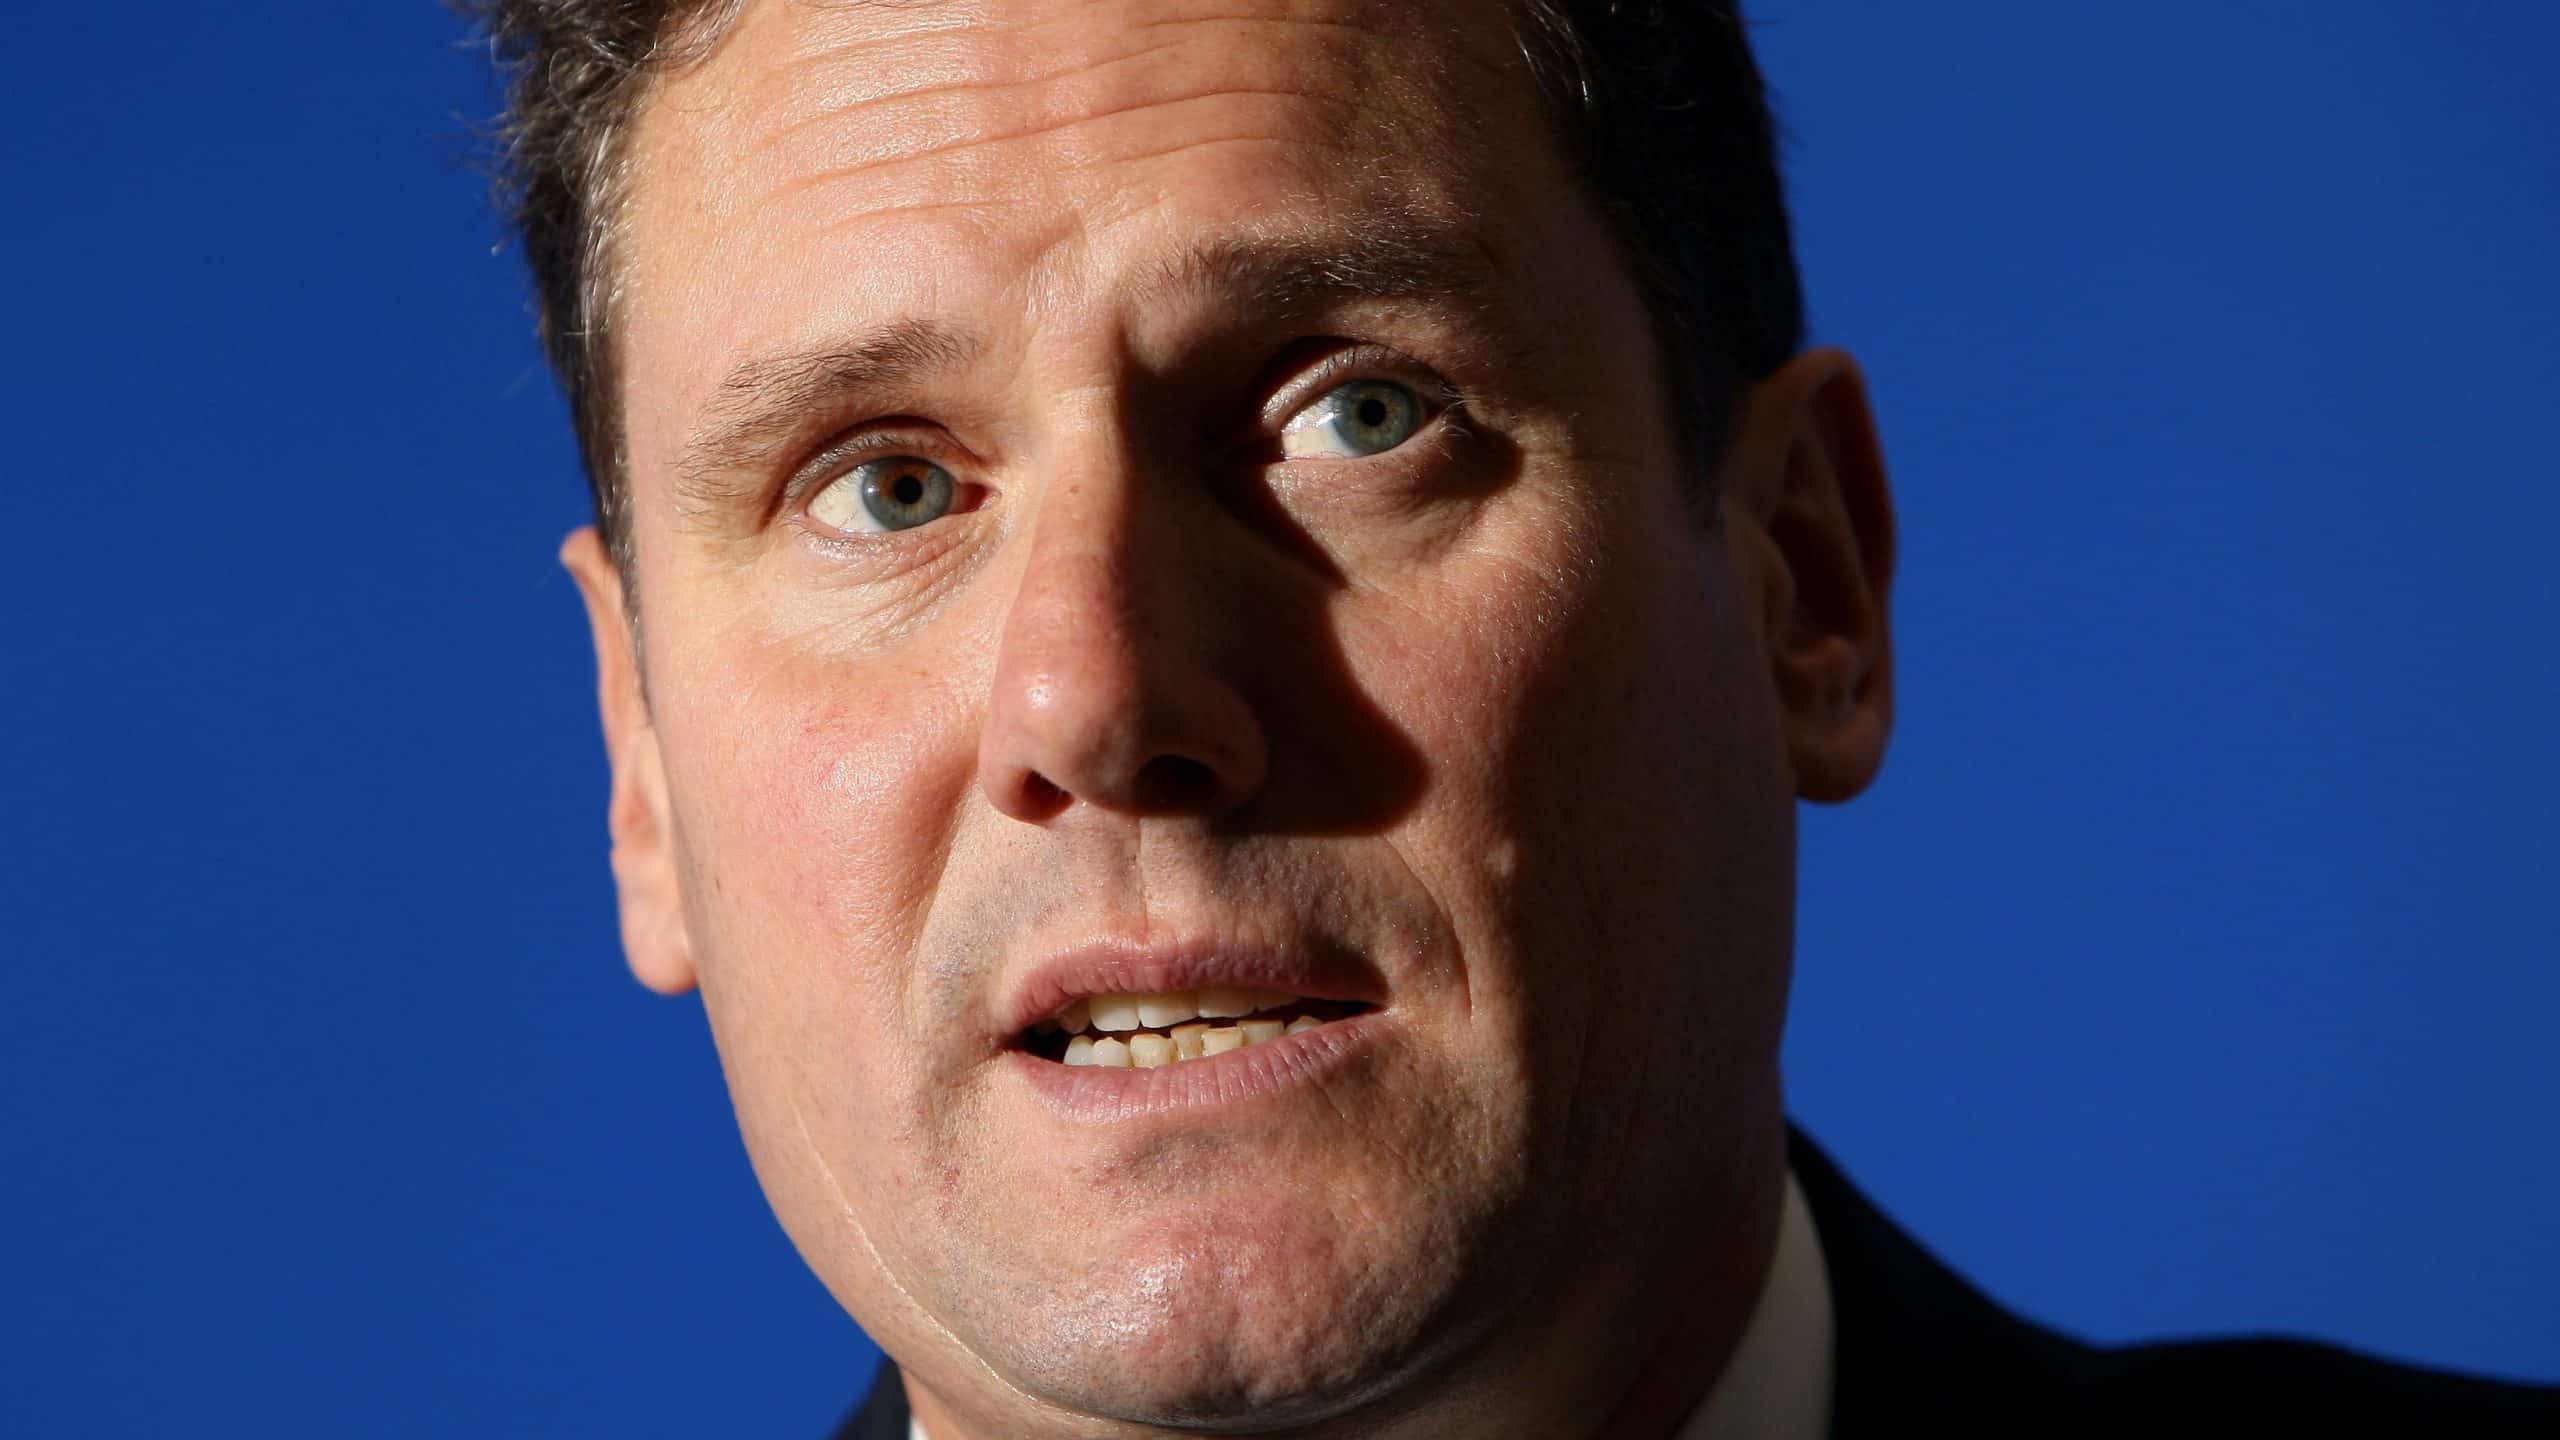 Coronavirus crisis could deepen Britain’s North-South divide, Starmer says